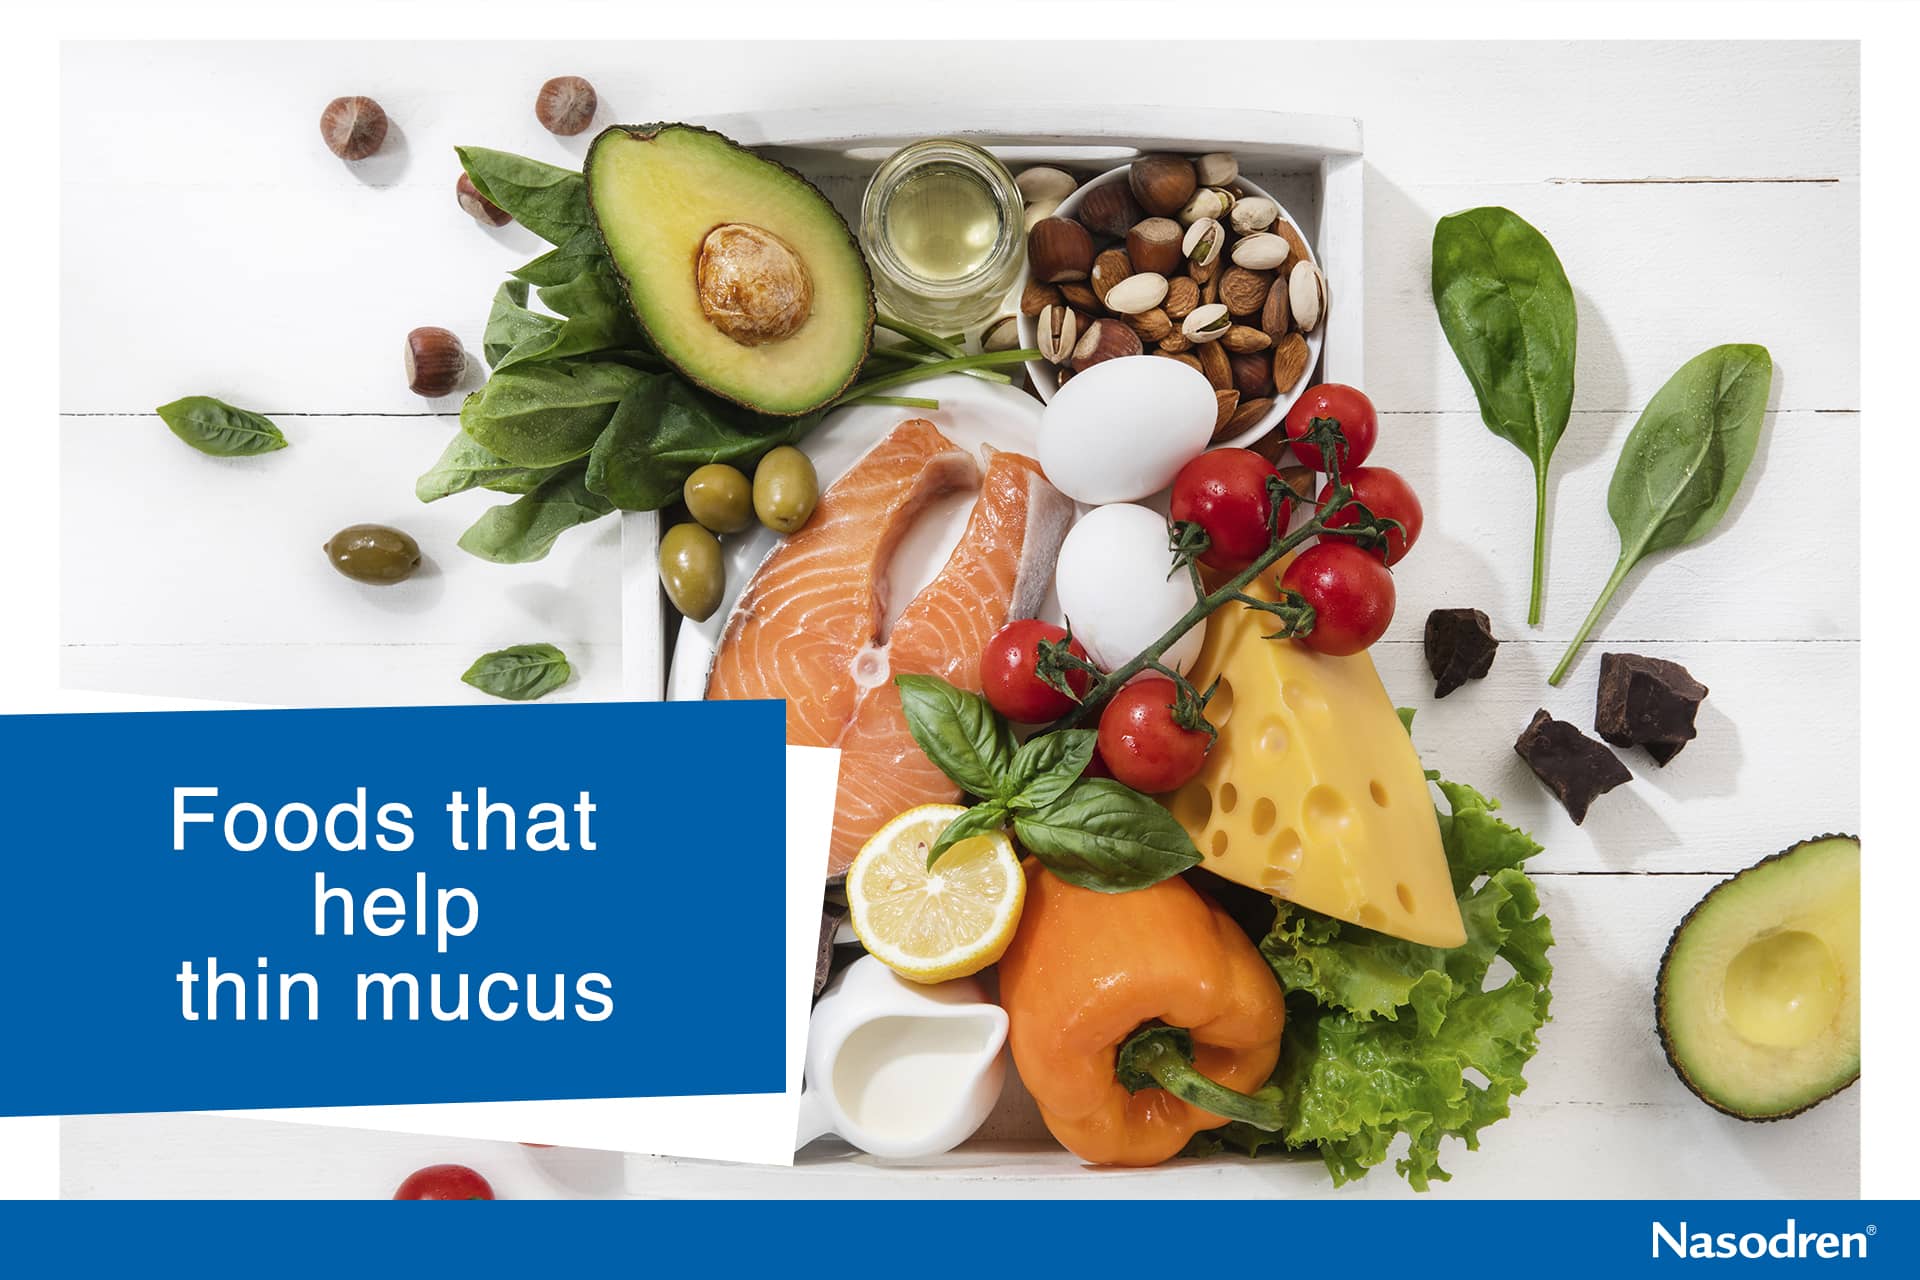 Foods that help thin mucus